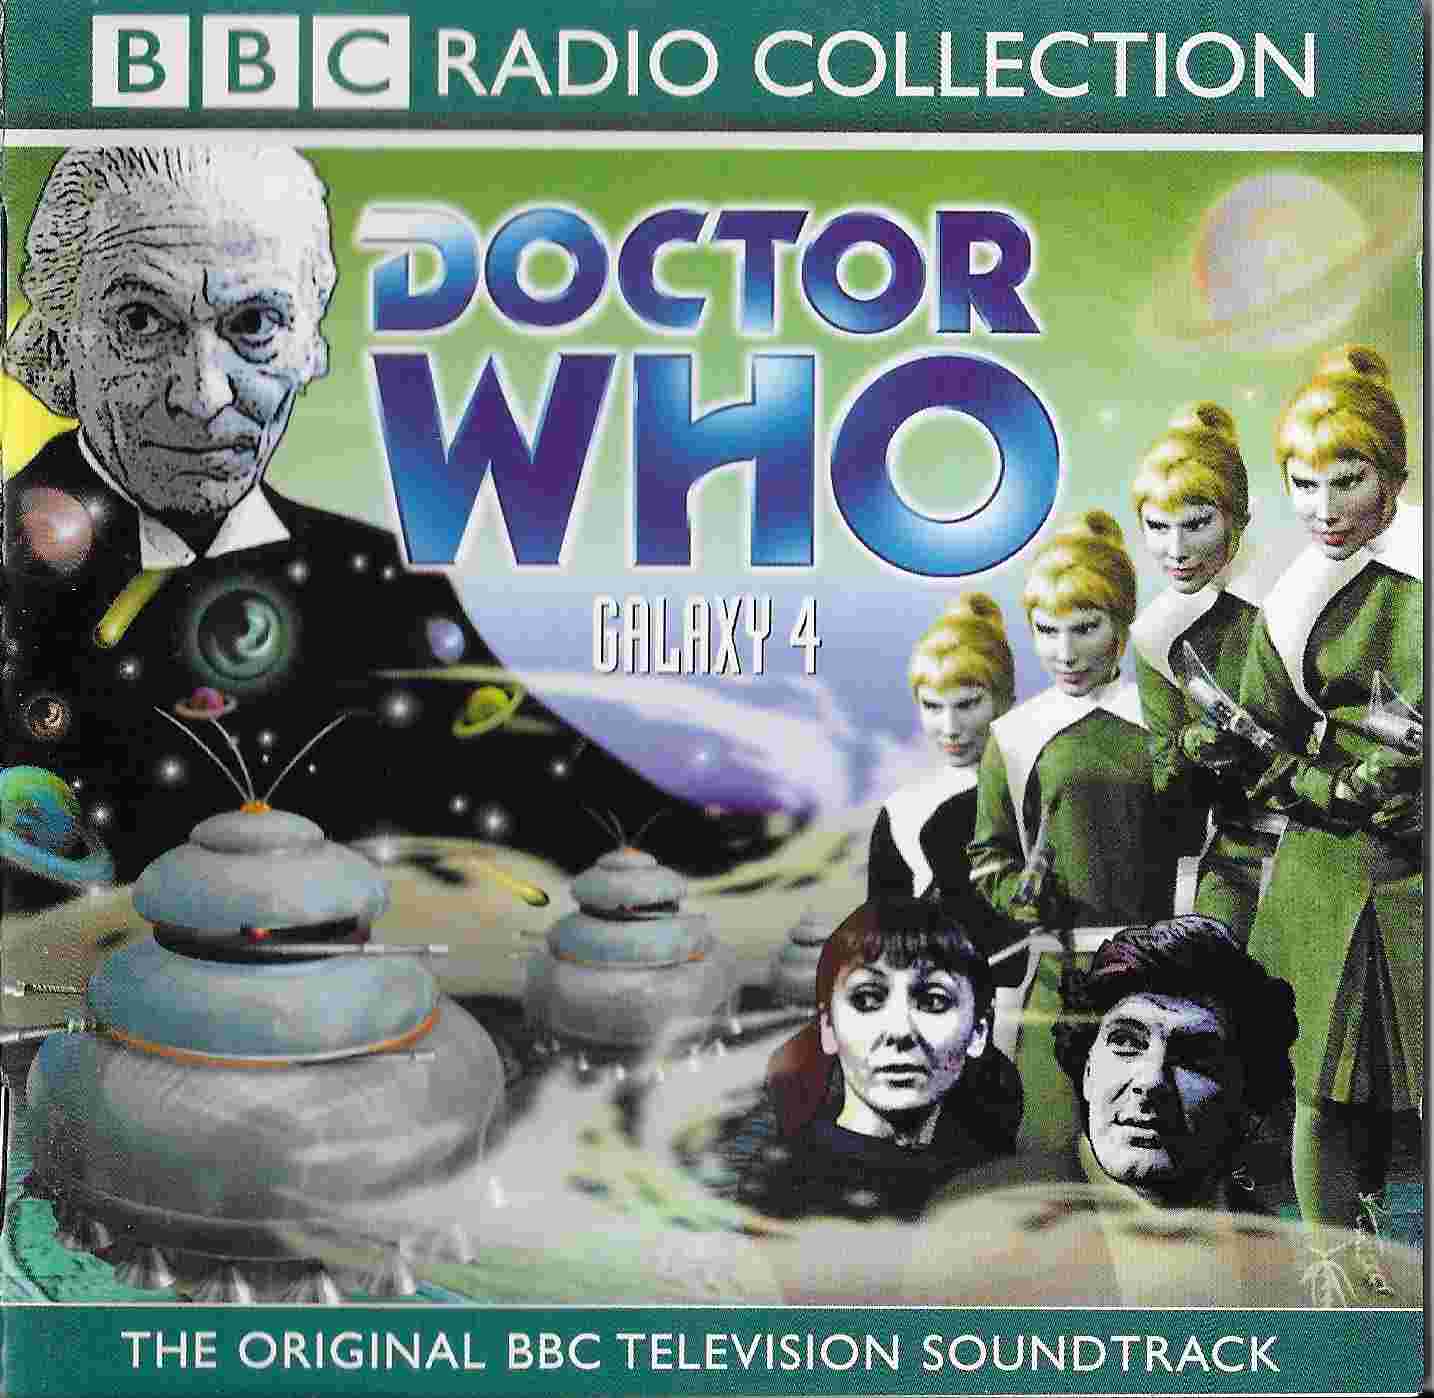 Picture of ISBN 0-563-47700-8 Doctor Who - Galaxy 4 by artist William Emms from the BBC records and Tapes library